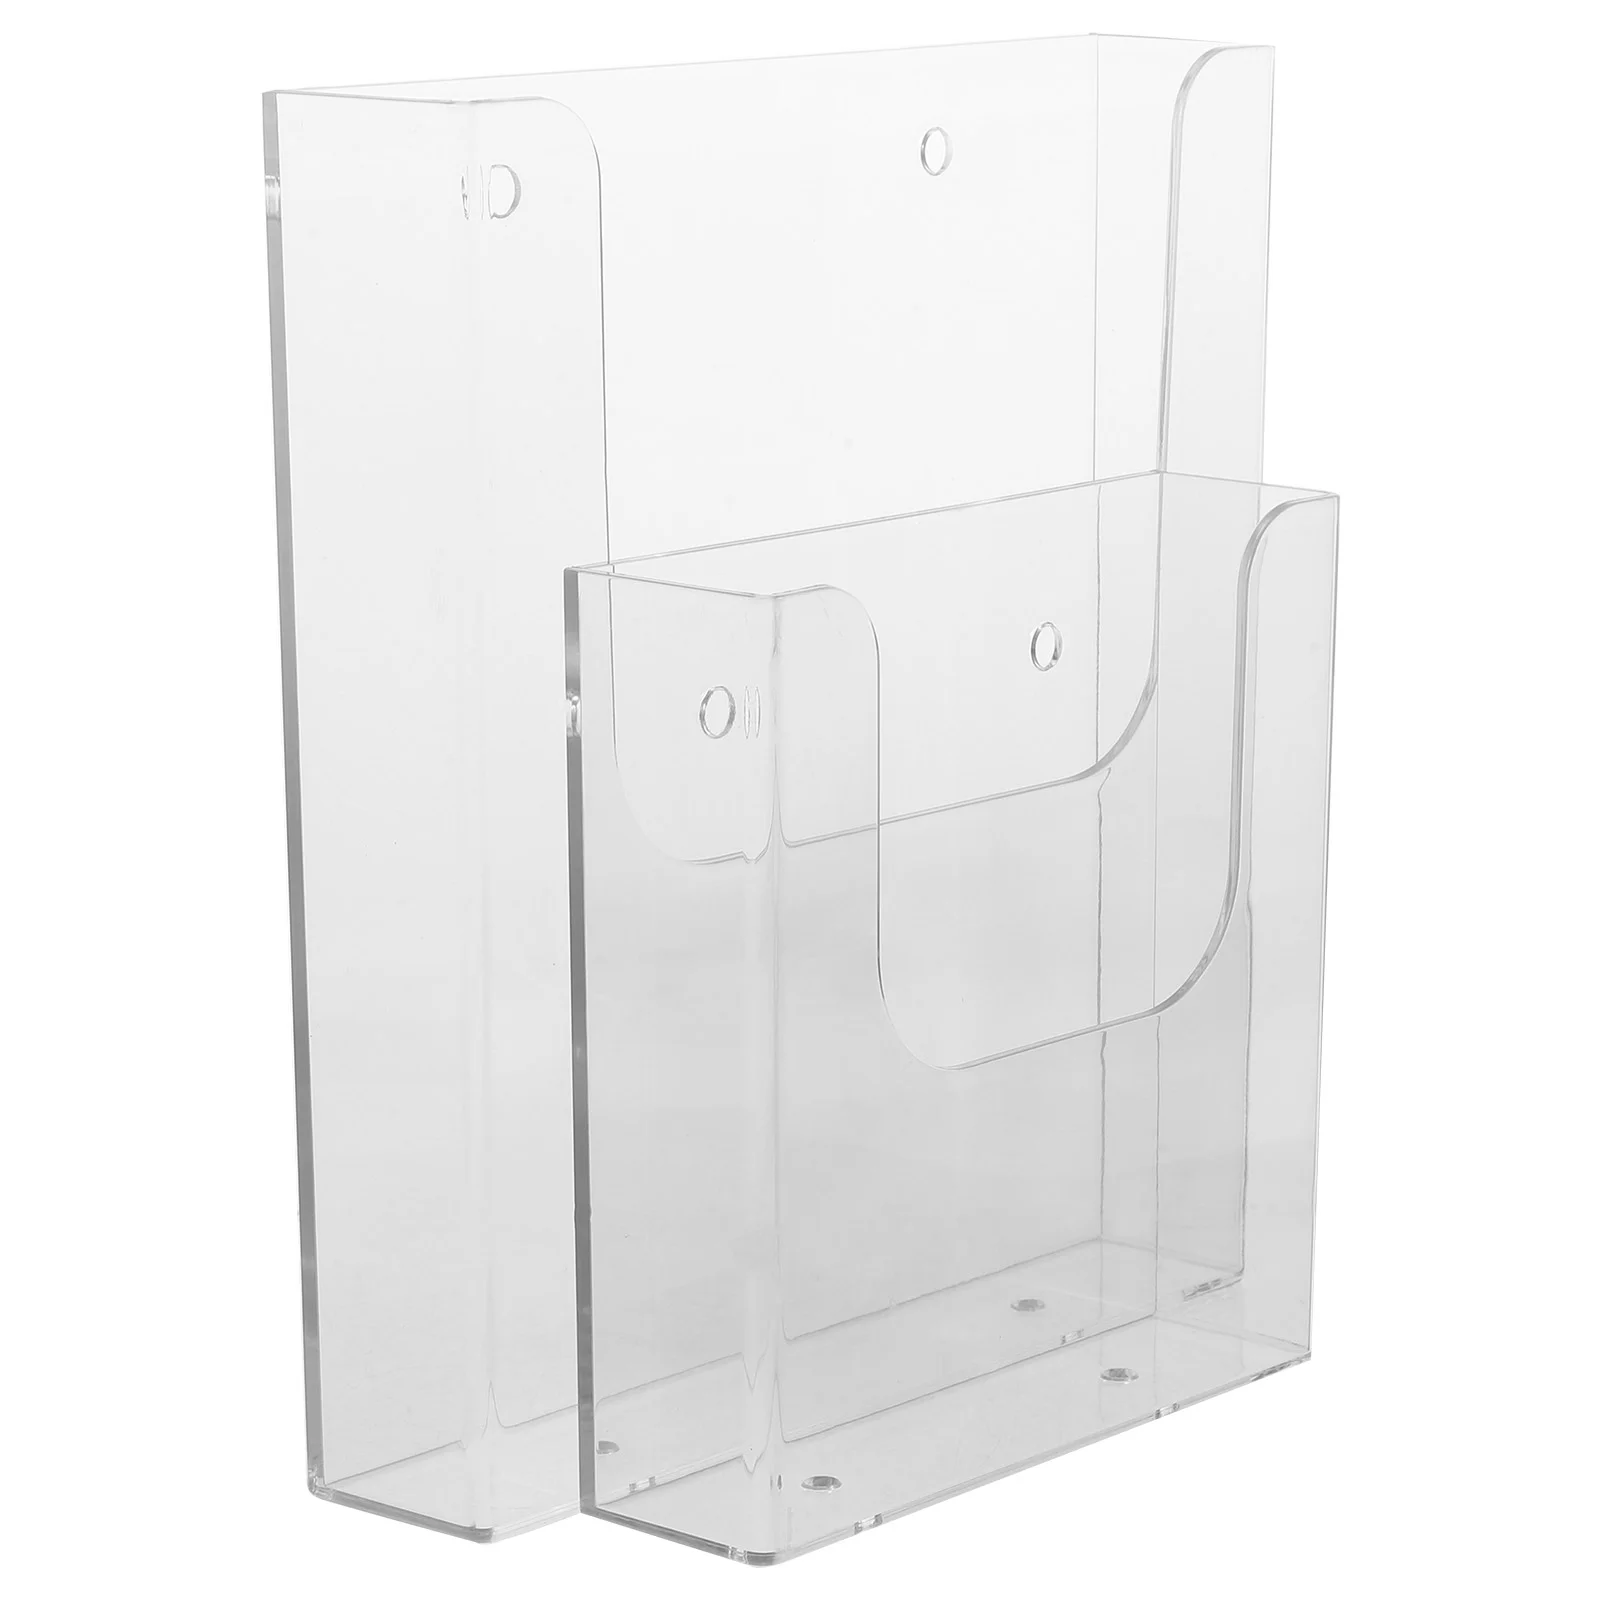 2 Pcs Transparent Document Holder Card Display Rack Paper Stand Literature Clear Magazine File Acrylic Brochure Holders for